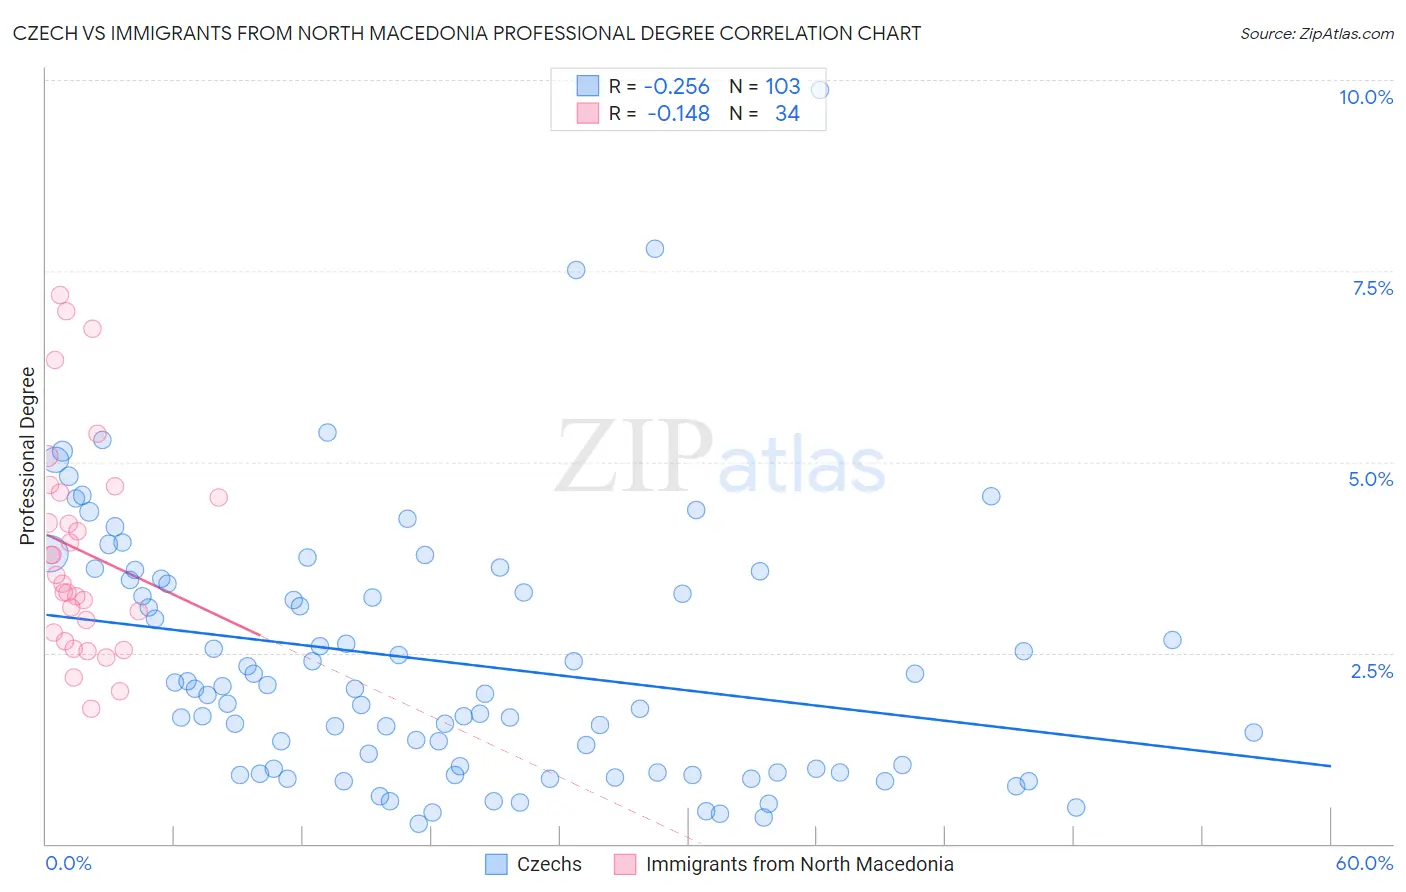 Czech vs Immigrants from North Macedonia Professional Degree